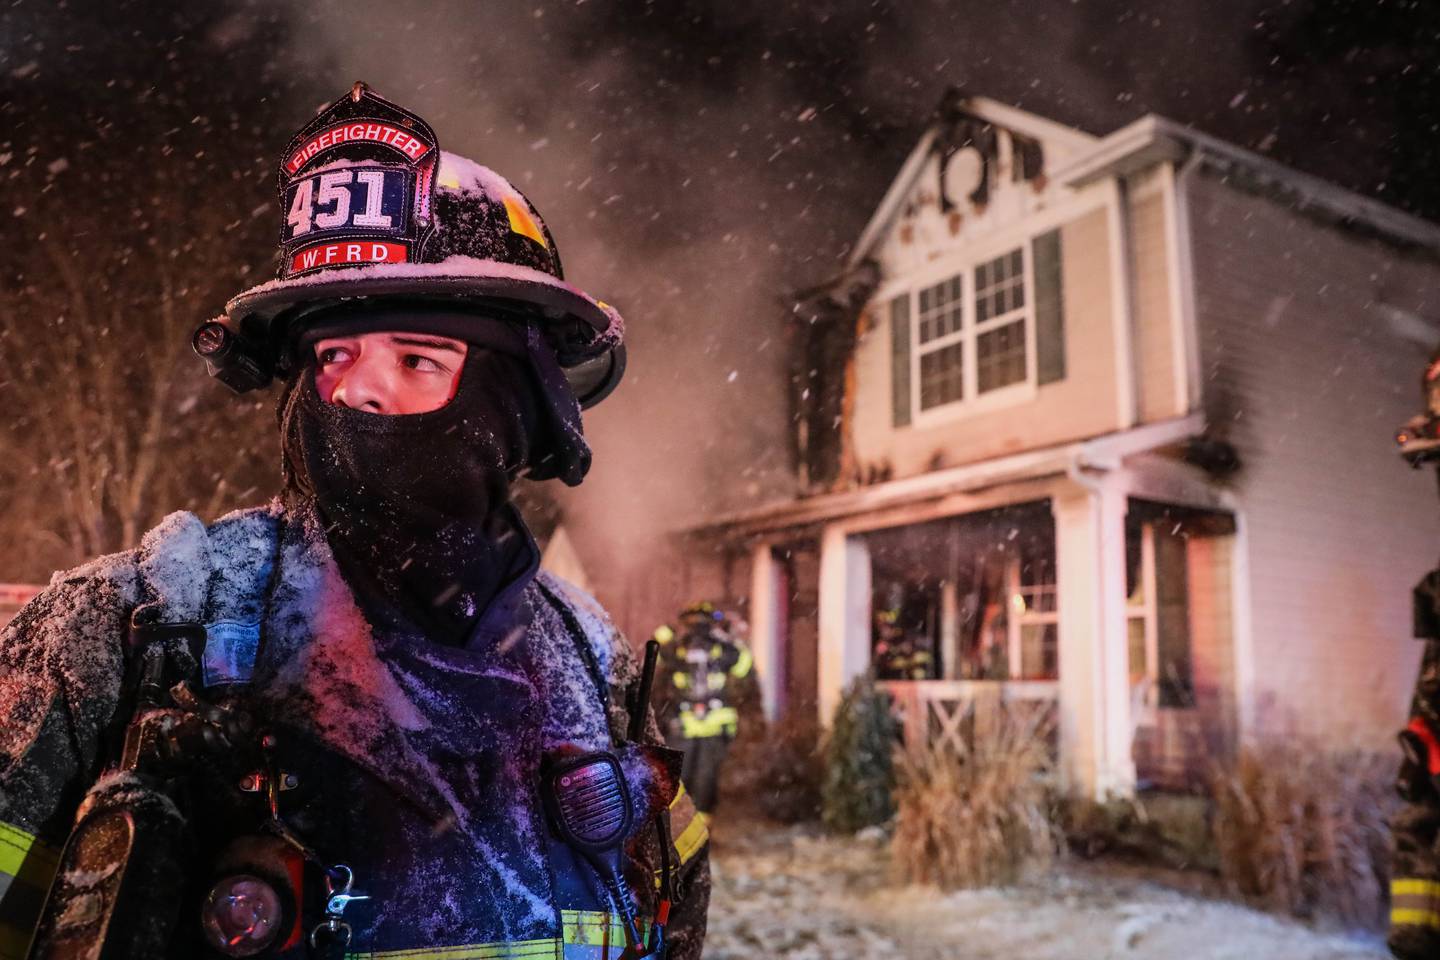 Woodstock Fire/Rescue District firefighters extinguished a blaze believed to have started in the garage of a two-story home in the 200 block of Martin Drive in Woodstock the night of Saturday, Jan. 22, 2022.